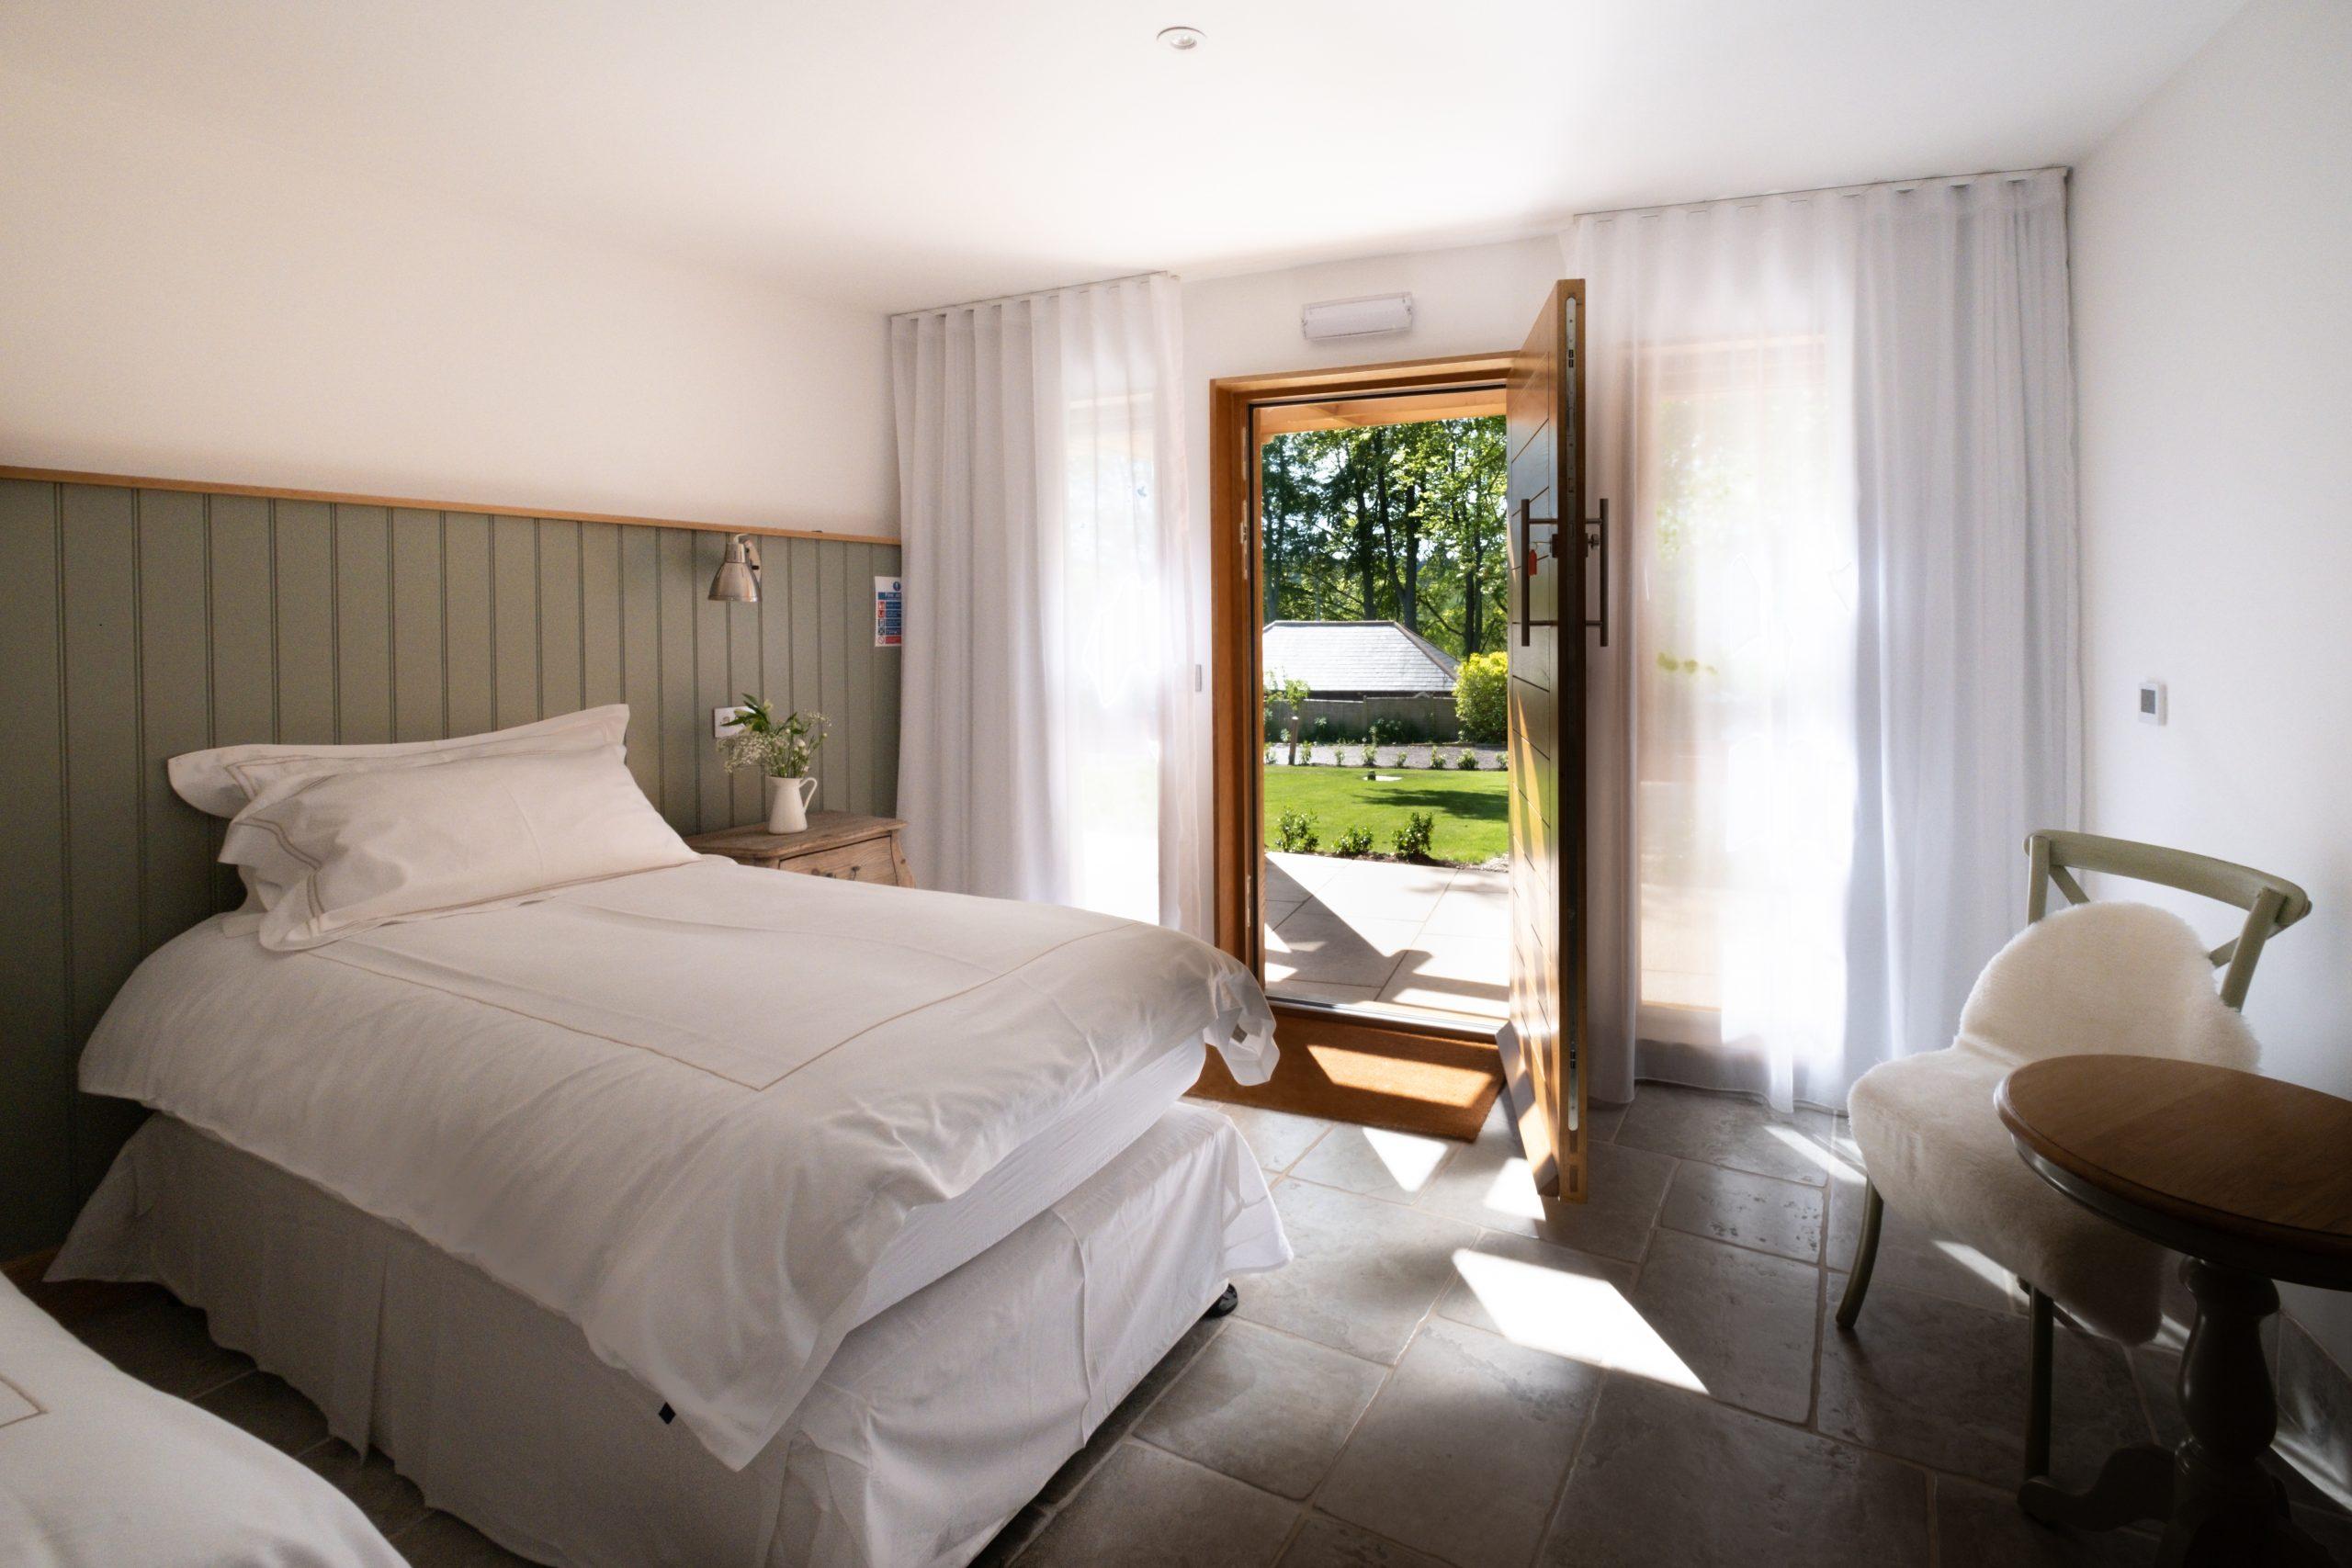 A hotel room with a door to outside to the garden. There is a bed with crisp white linen, a bedside table and a small table and chair opposite.